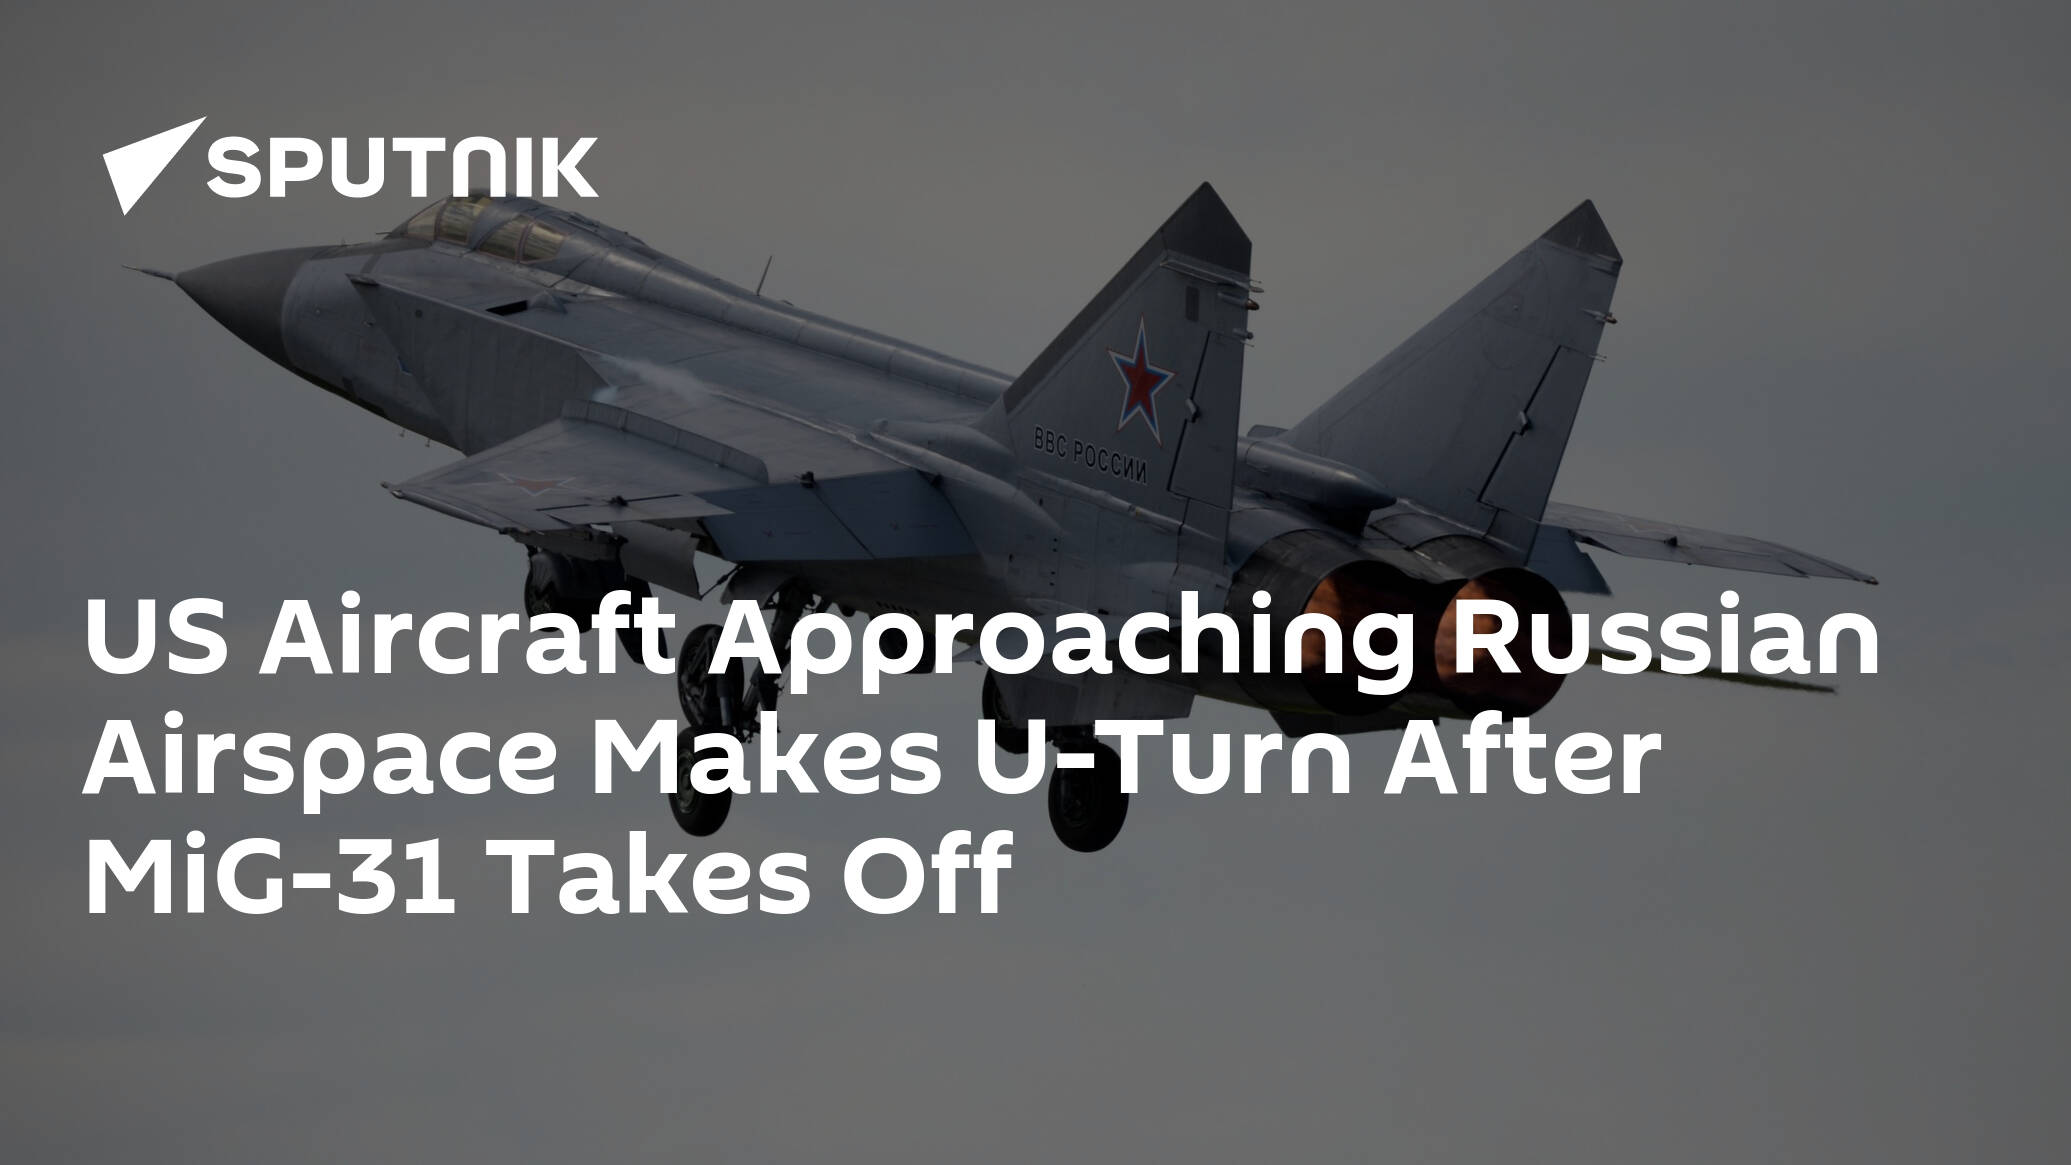 US Aircraft Approaching Russian Airspace Makes U-Turn After MiG-31 Takes Off